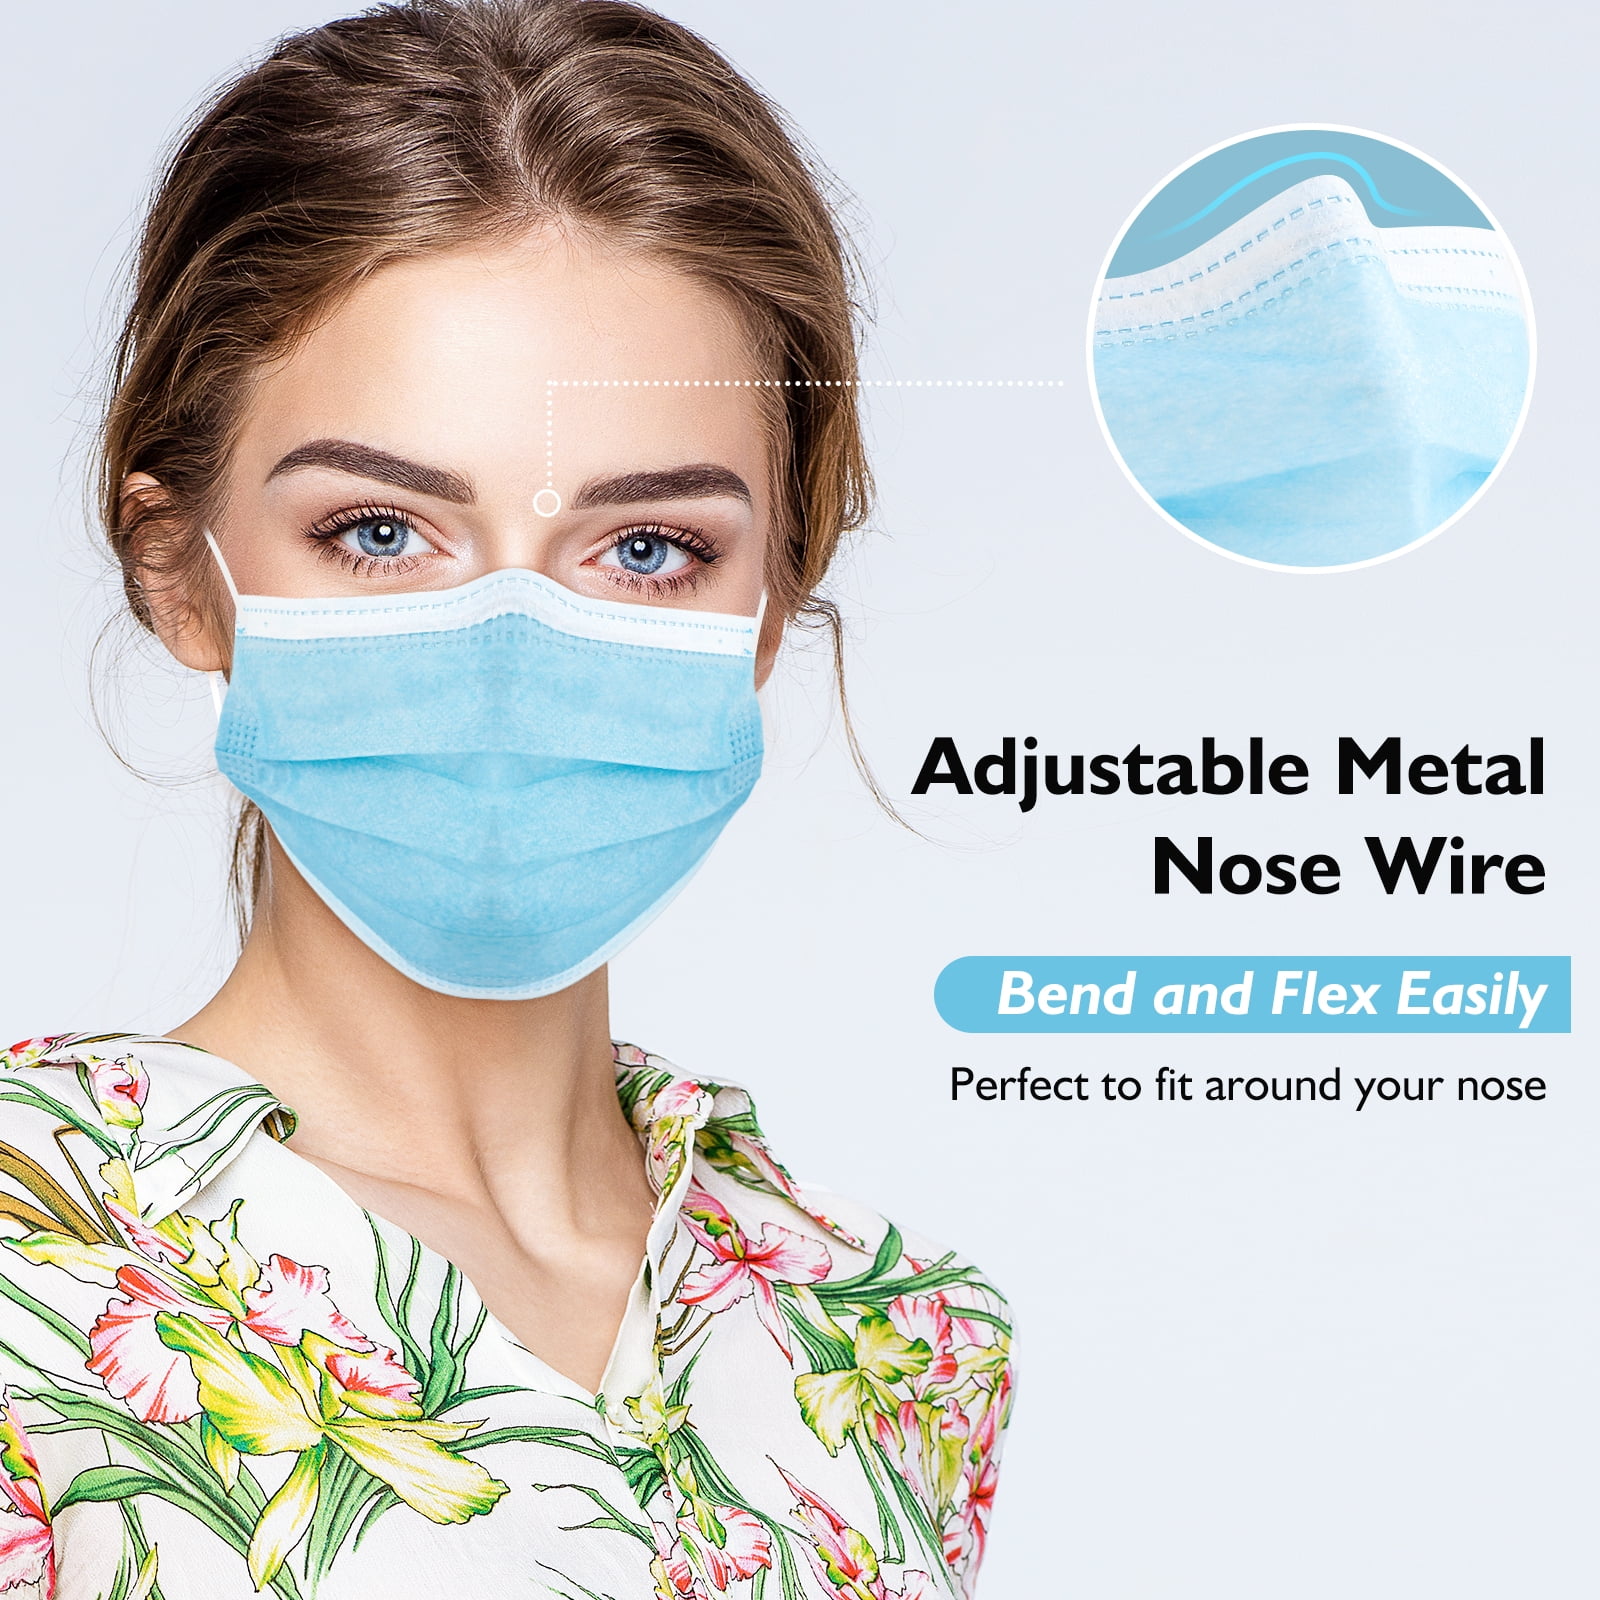 50pcs Mask Disposable Children#39;s Mask Cartoon Printing Soft Skin-friendly,  3 Layers With Elastic Earrings Anti-smog Outdoor Tools (blue Batman)